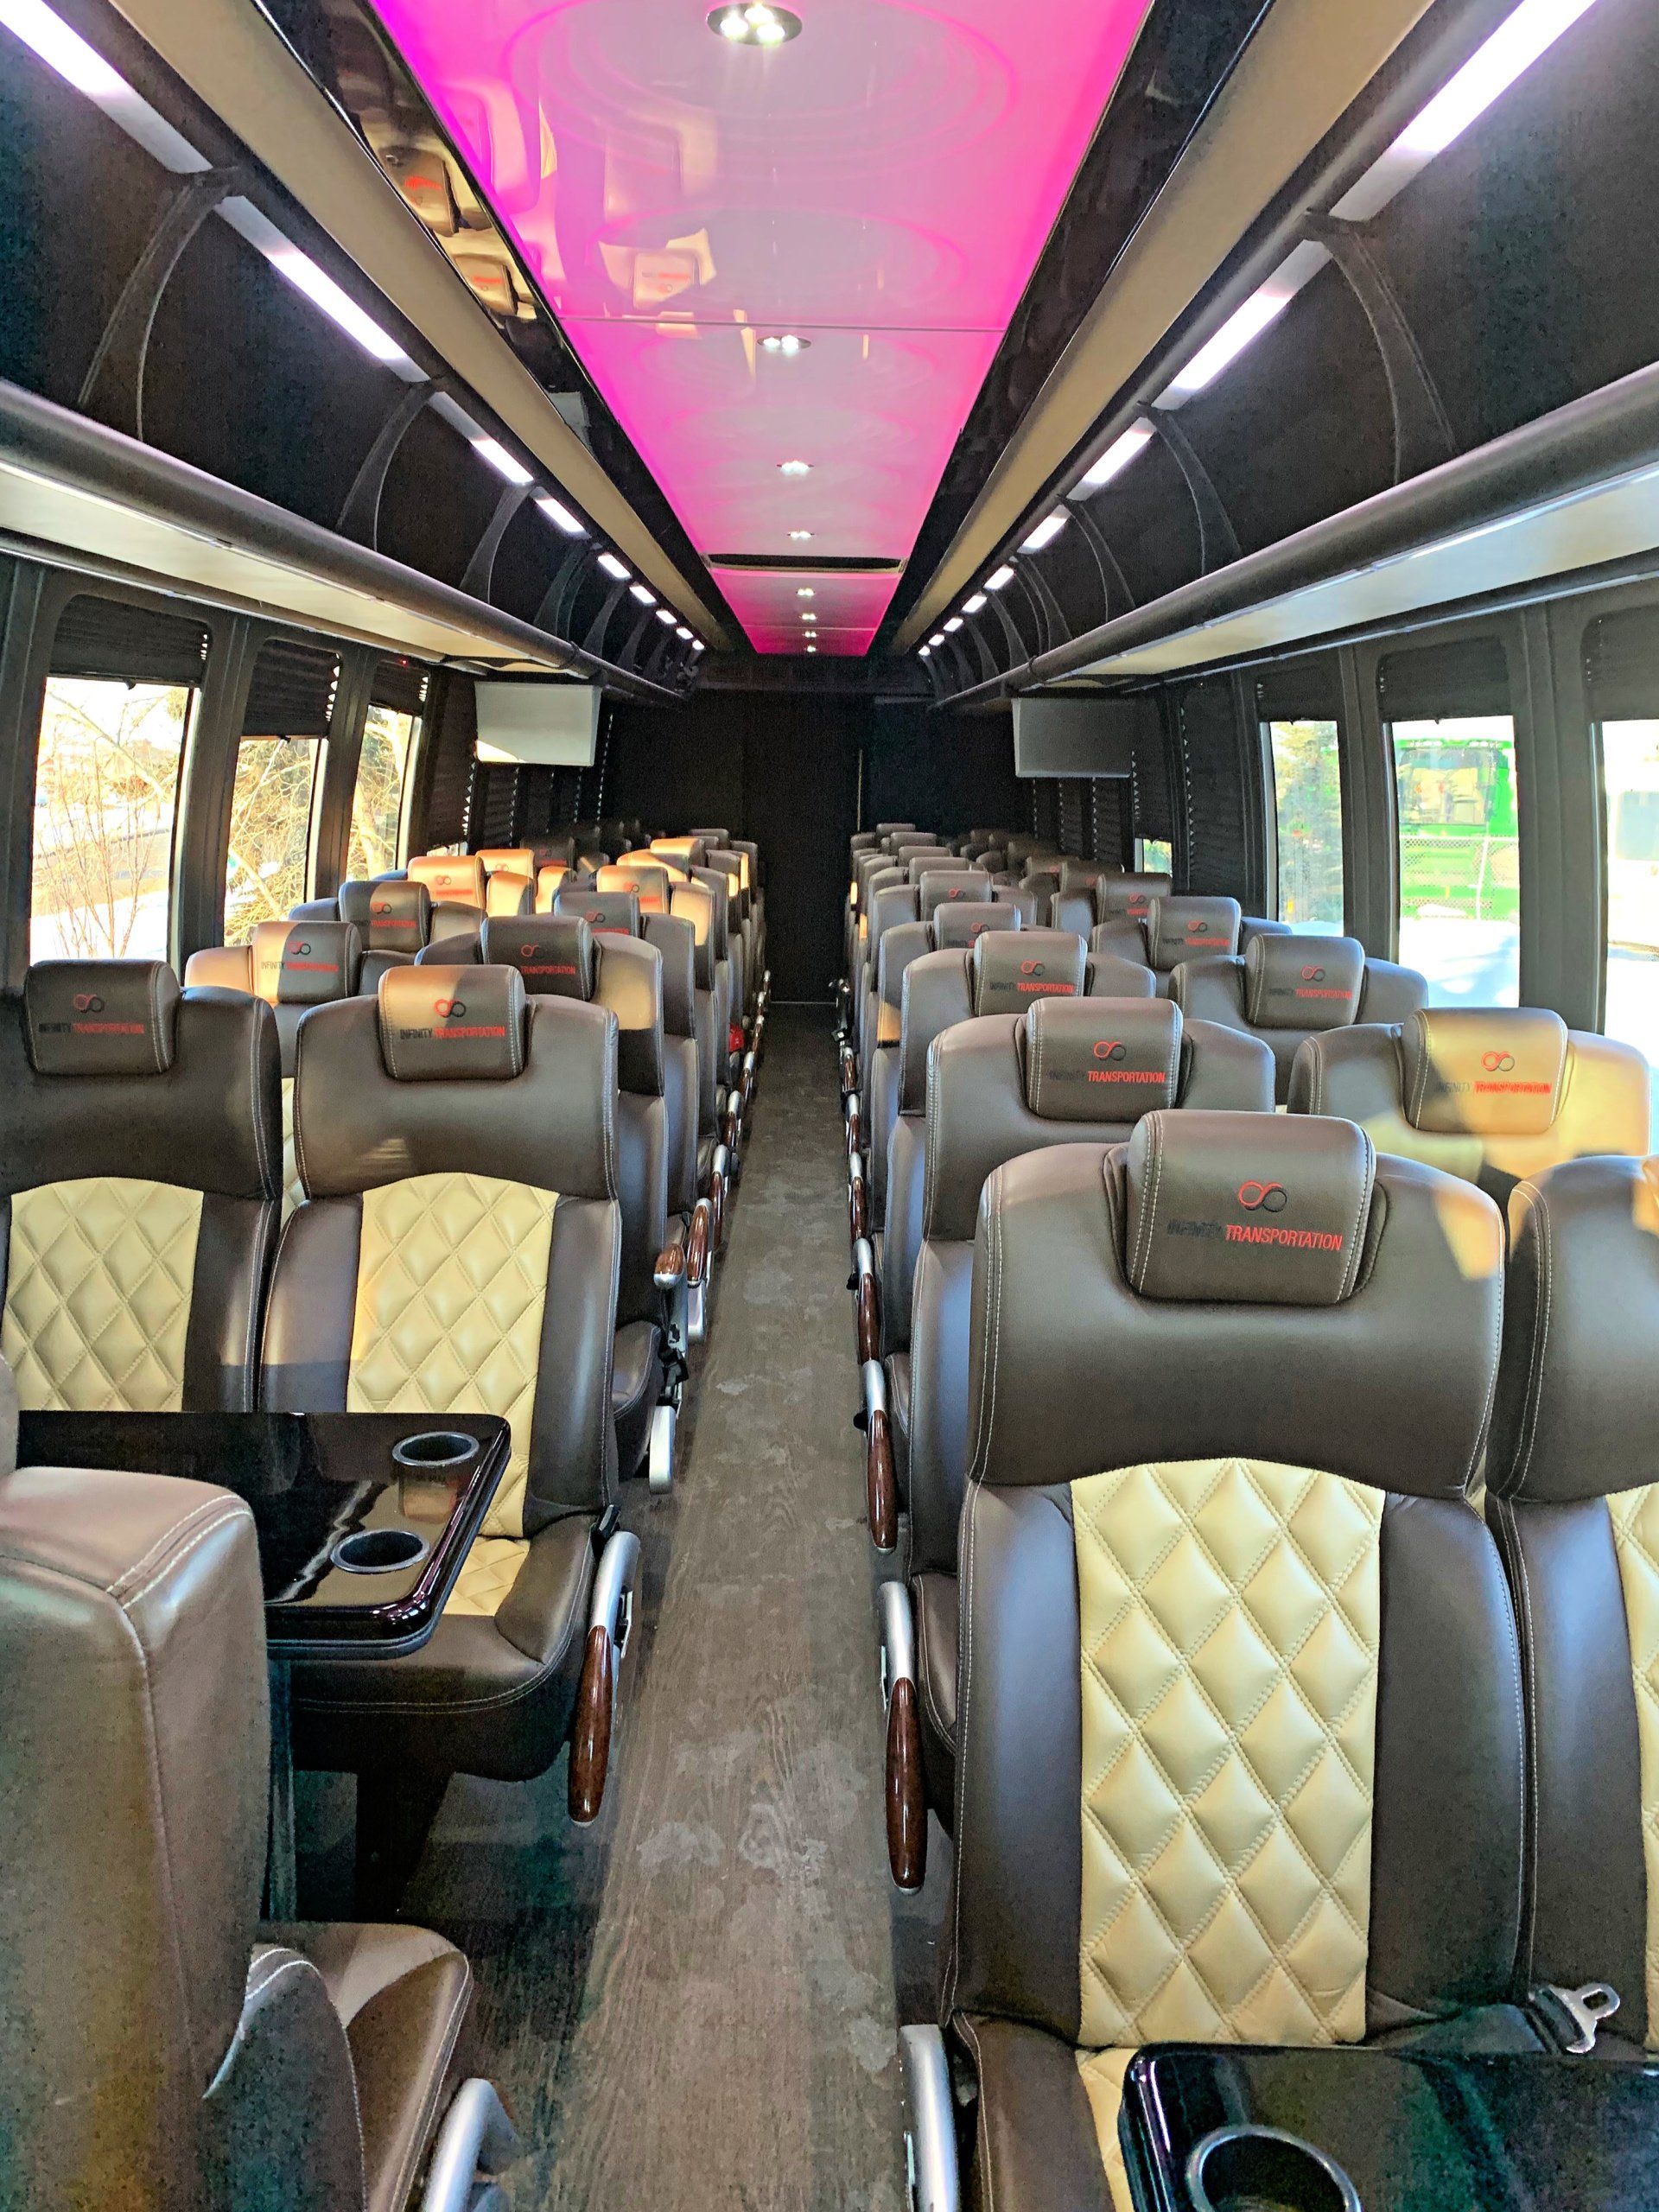 Limo To Go 47 passenger coach shuttle bus interior seating overview